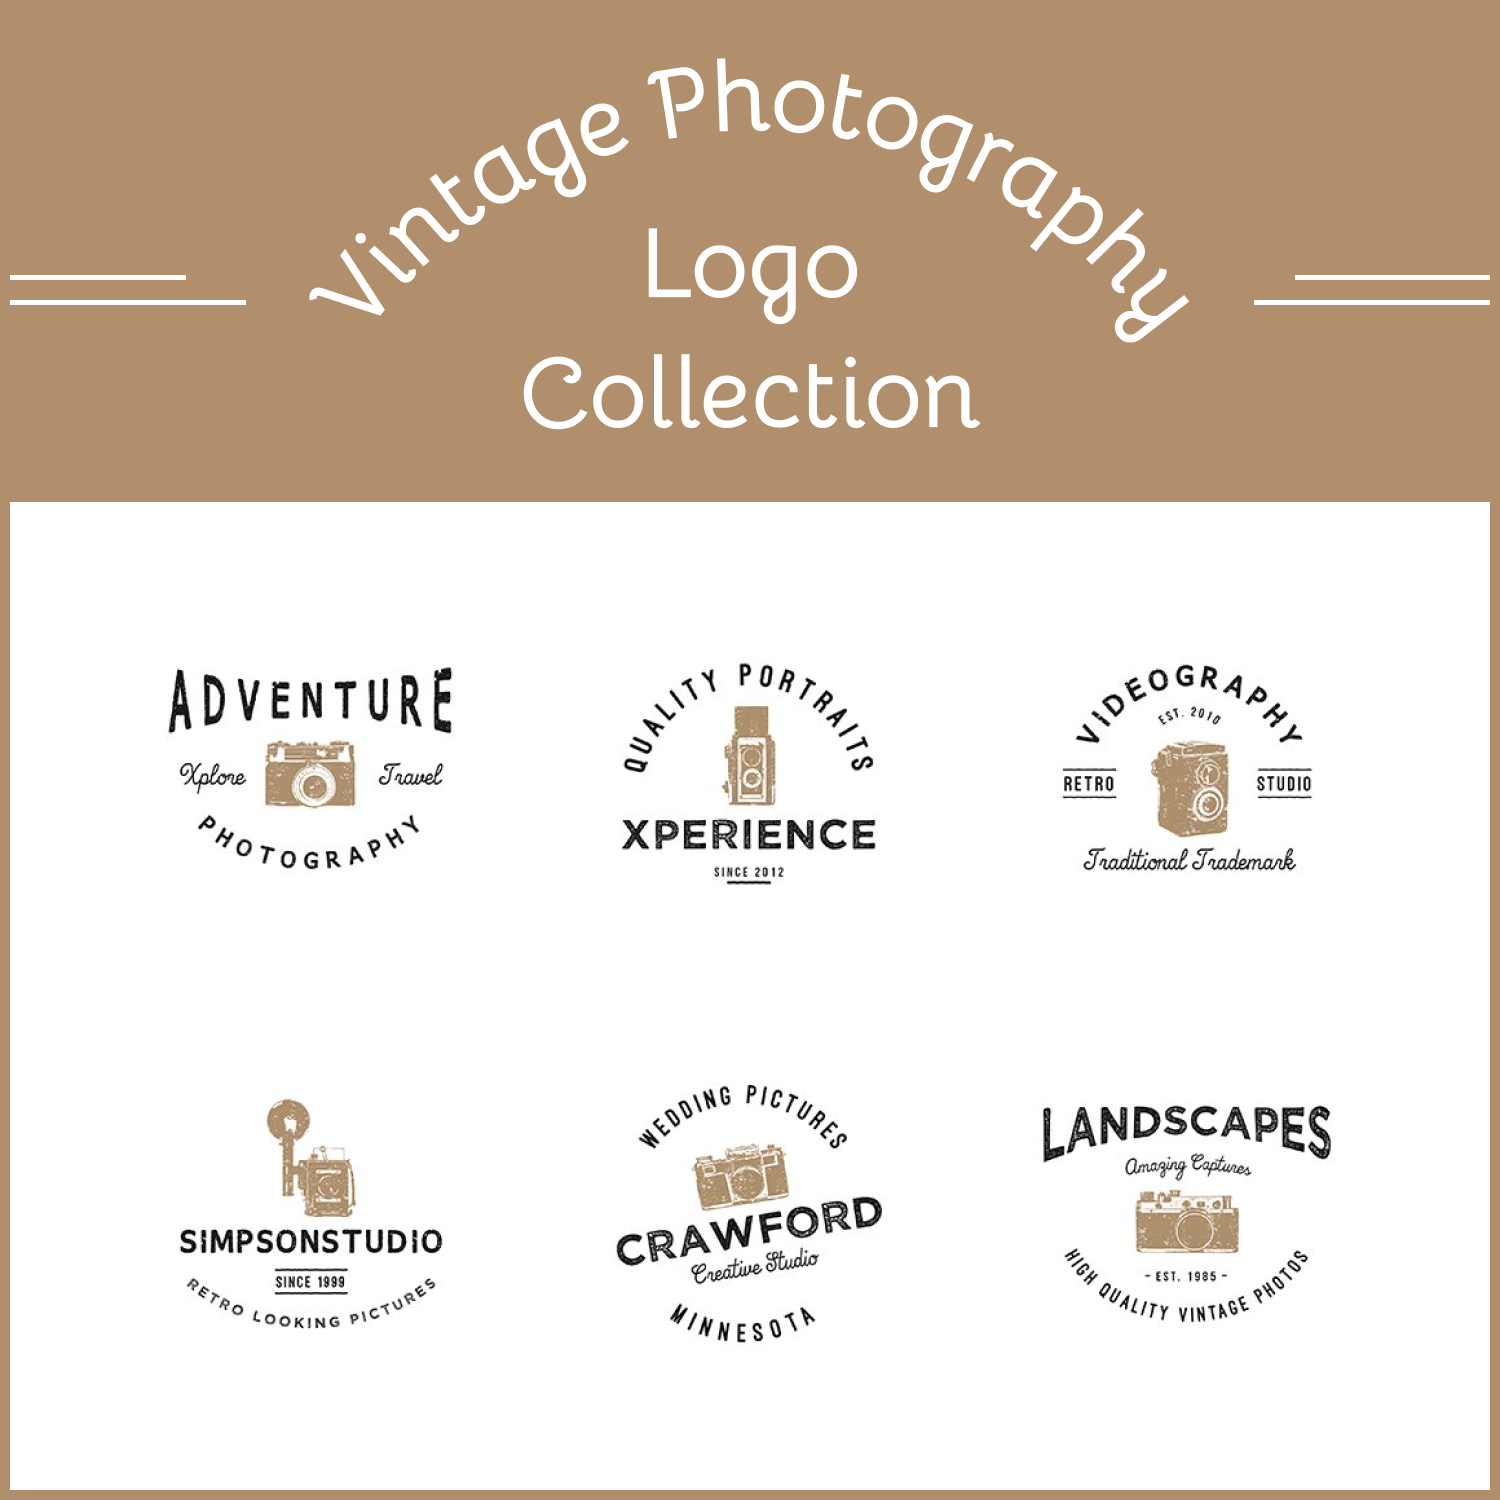 Preview vintage photography logo collection.